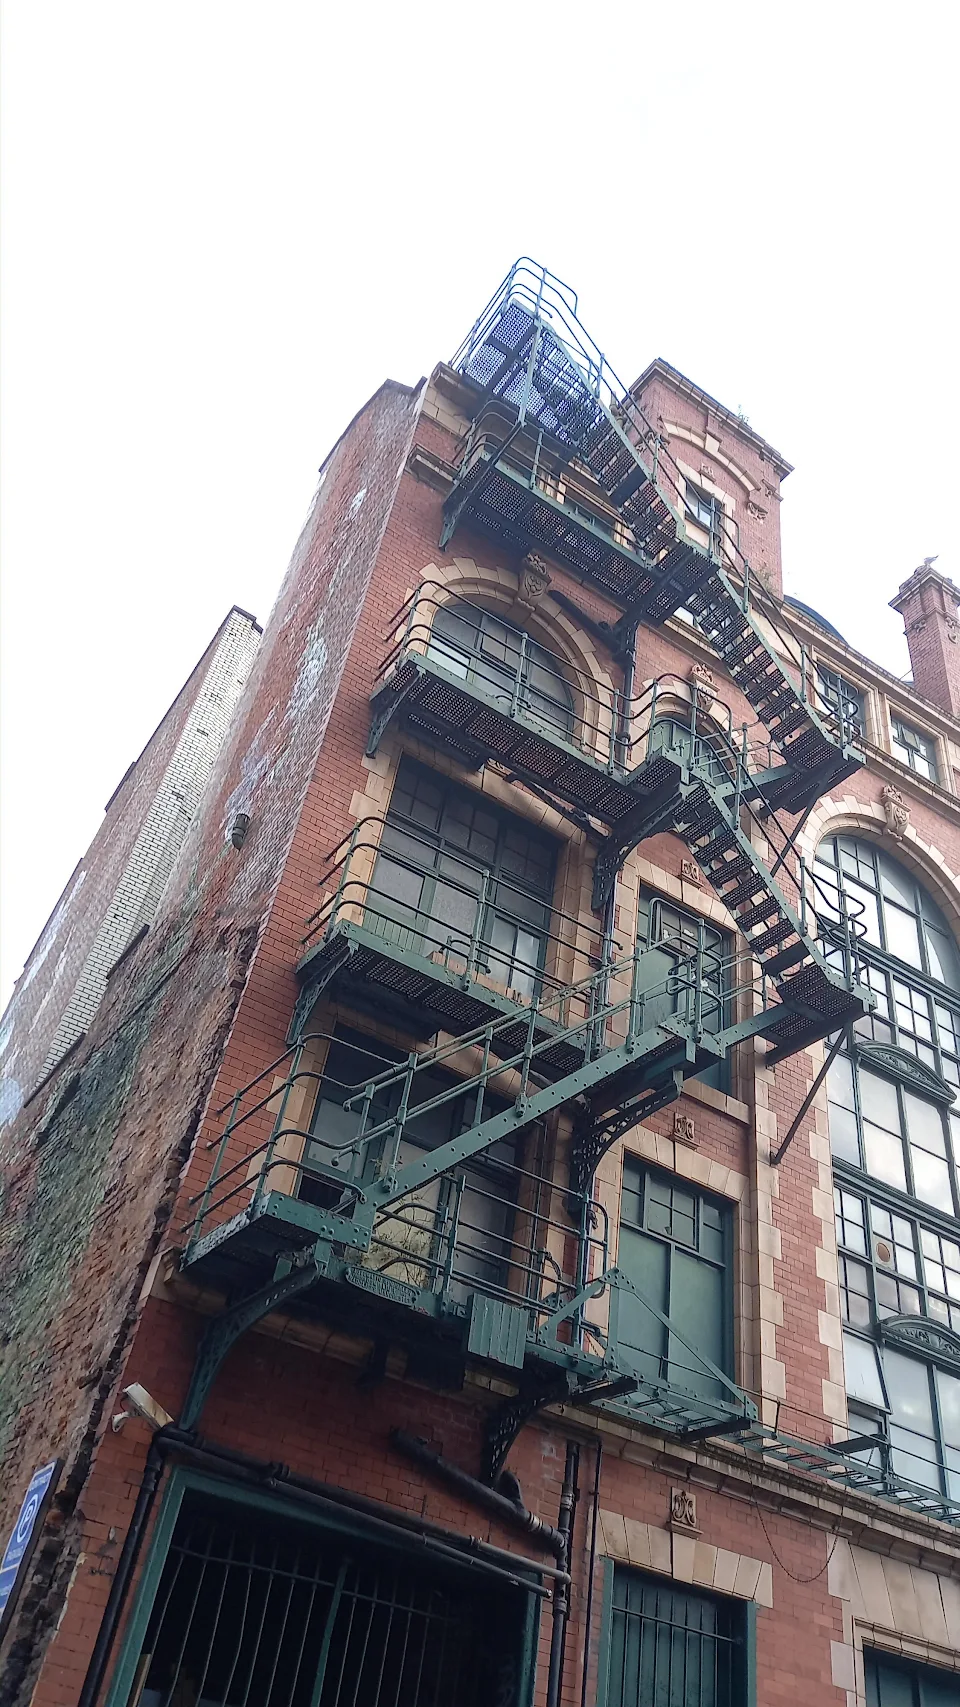 Manhattan-style fire exit, Ancoats, Manchester, UK